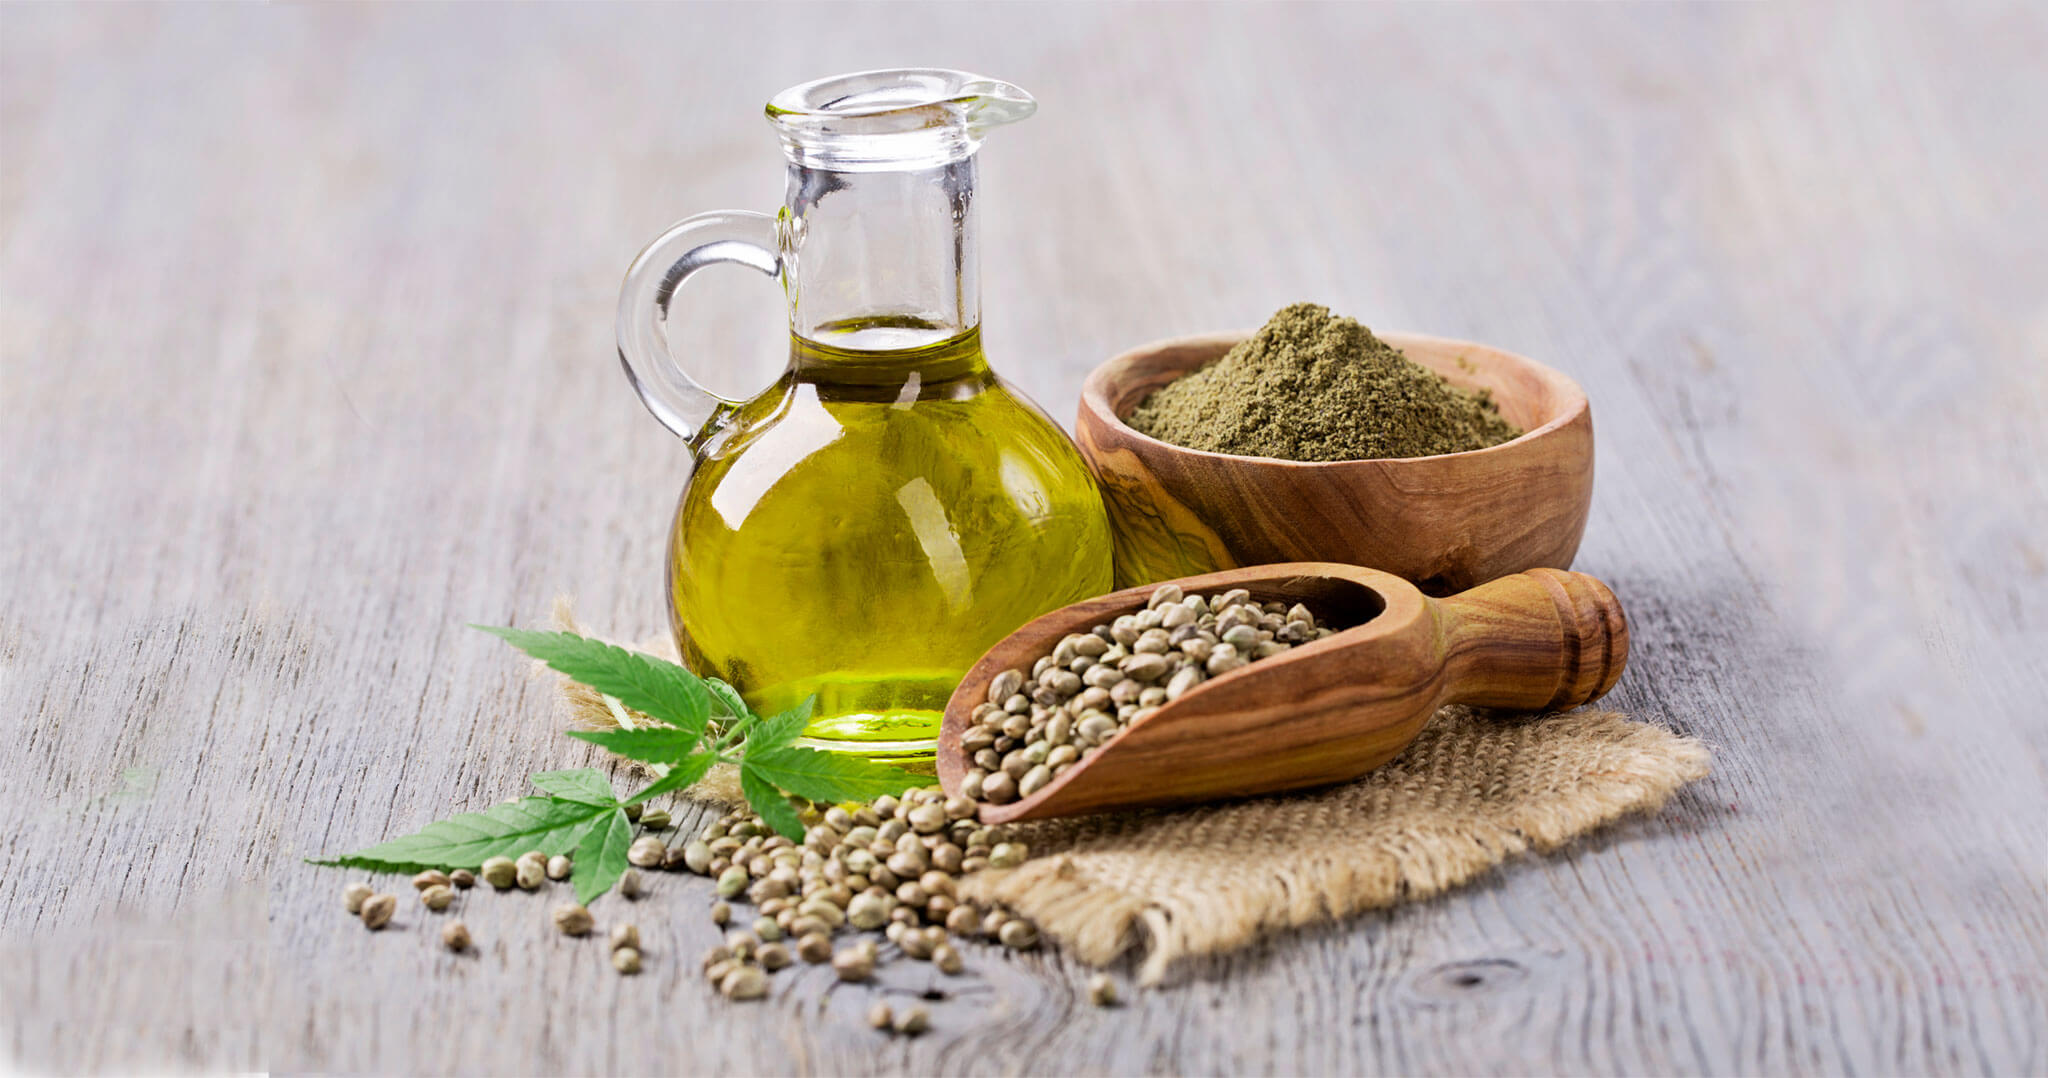 Where to buy CBD Oil in Epping Forest, UK